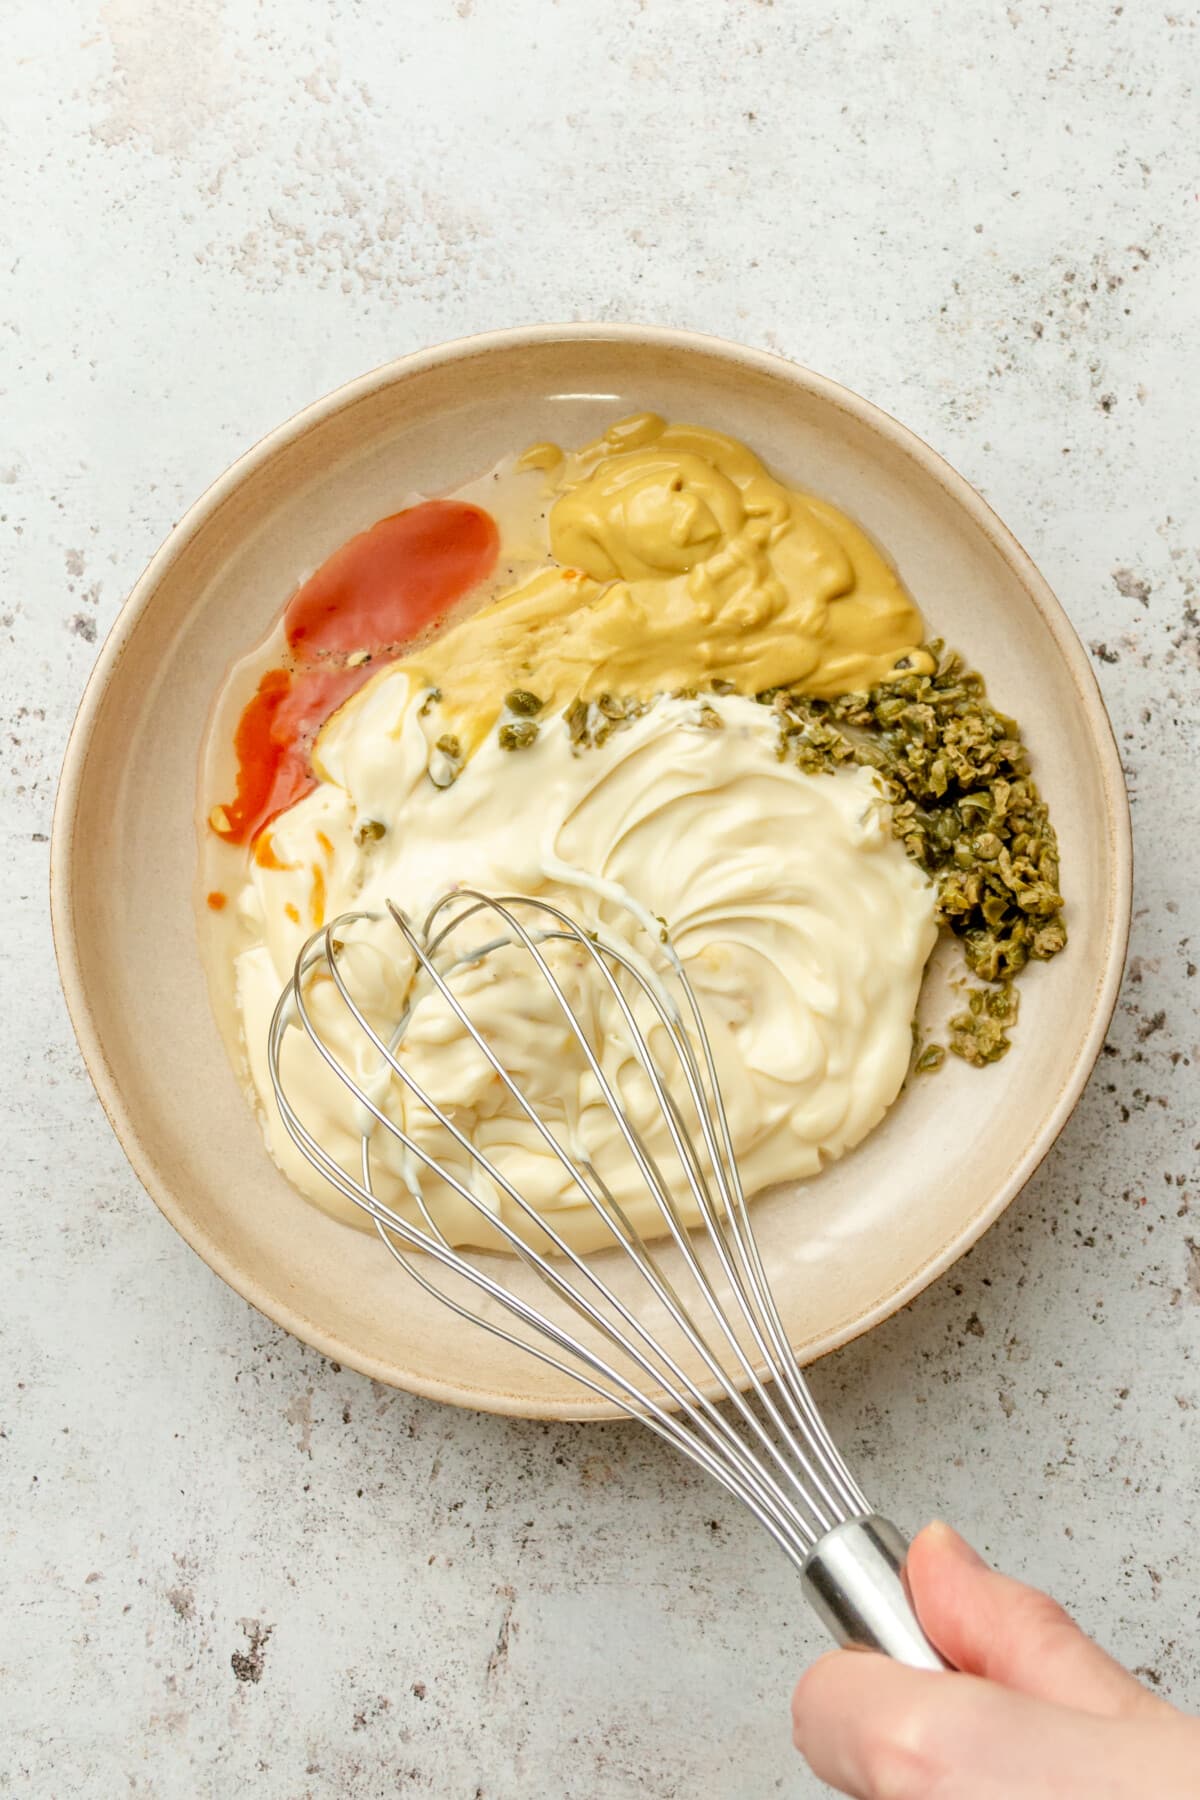 A remoulade sauce is whisked in a ceramic shallow bowl on a light grey surface.